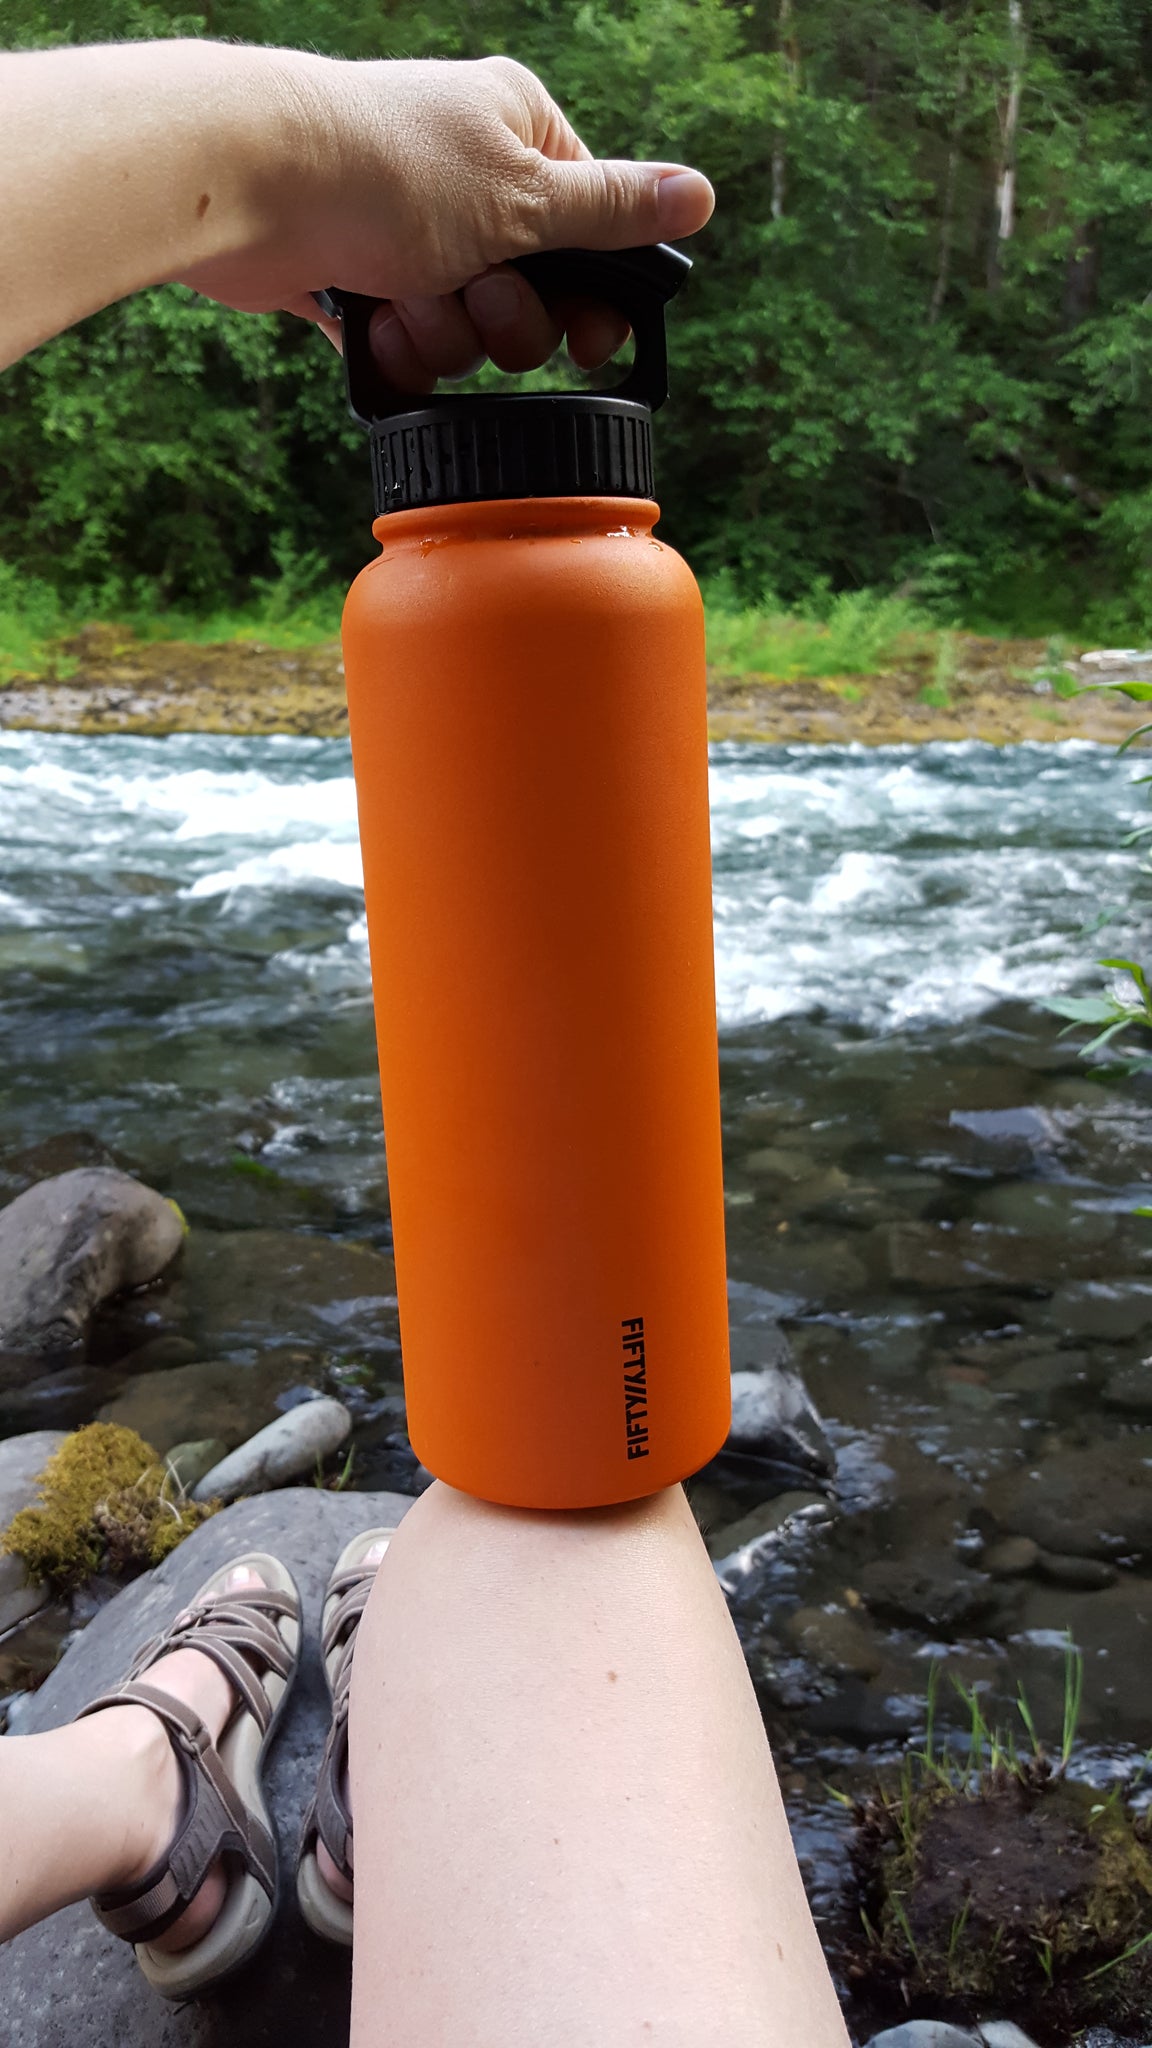 Fifty/Fifty 40oz Sport Double Wall Insulated Water Bottle Stainless Steel,  1 - Fred Meyer